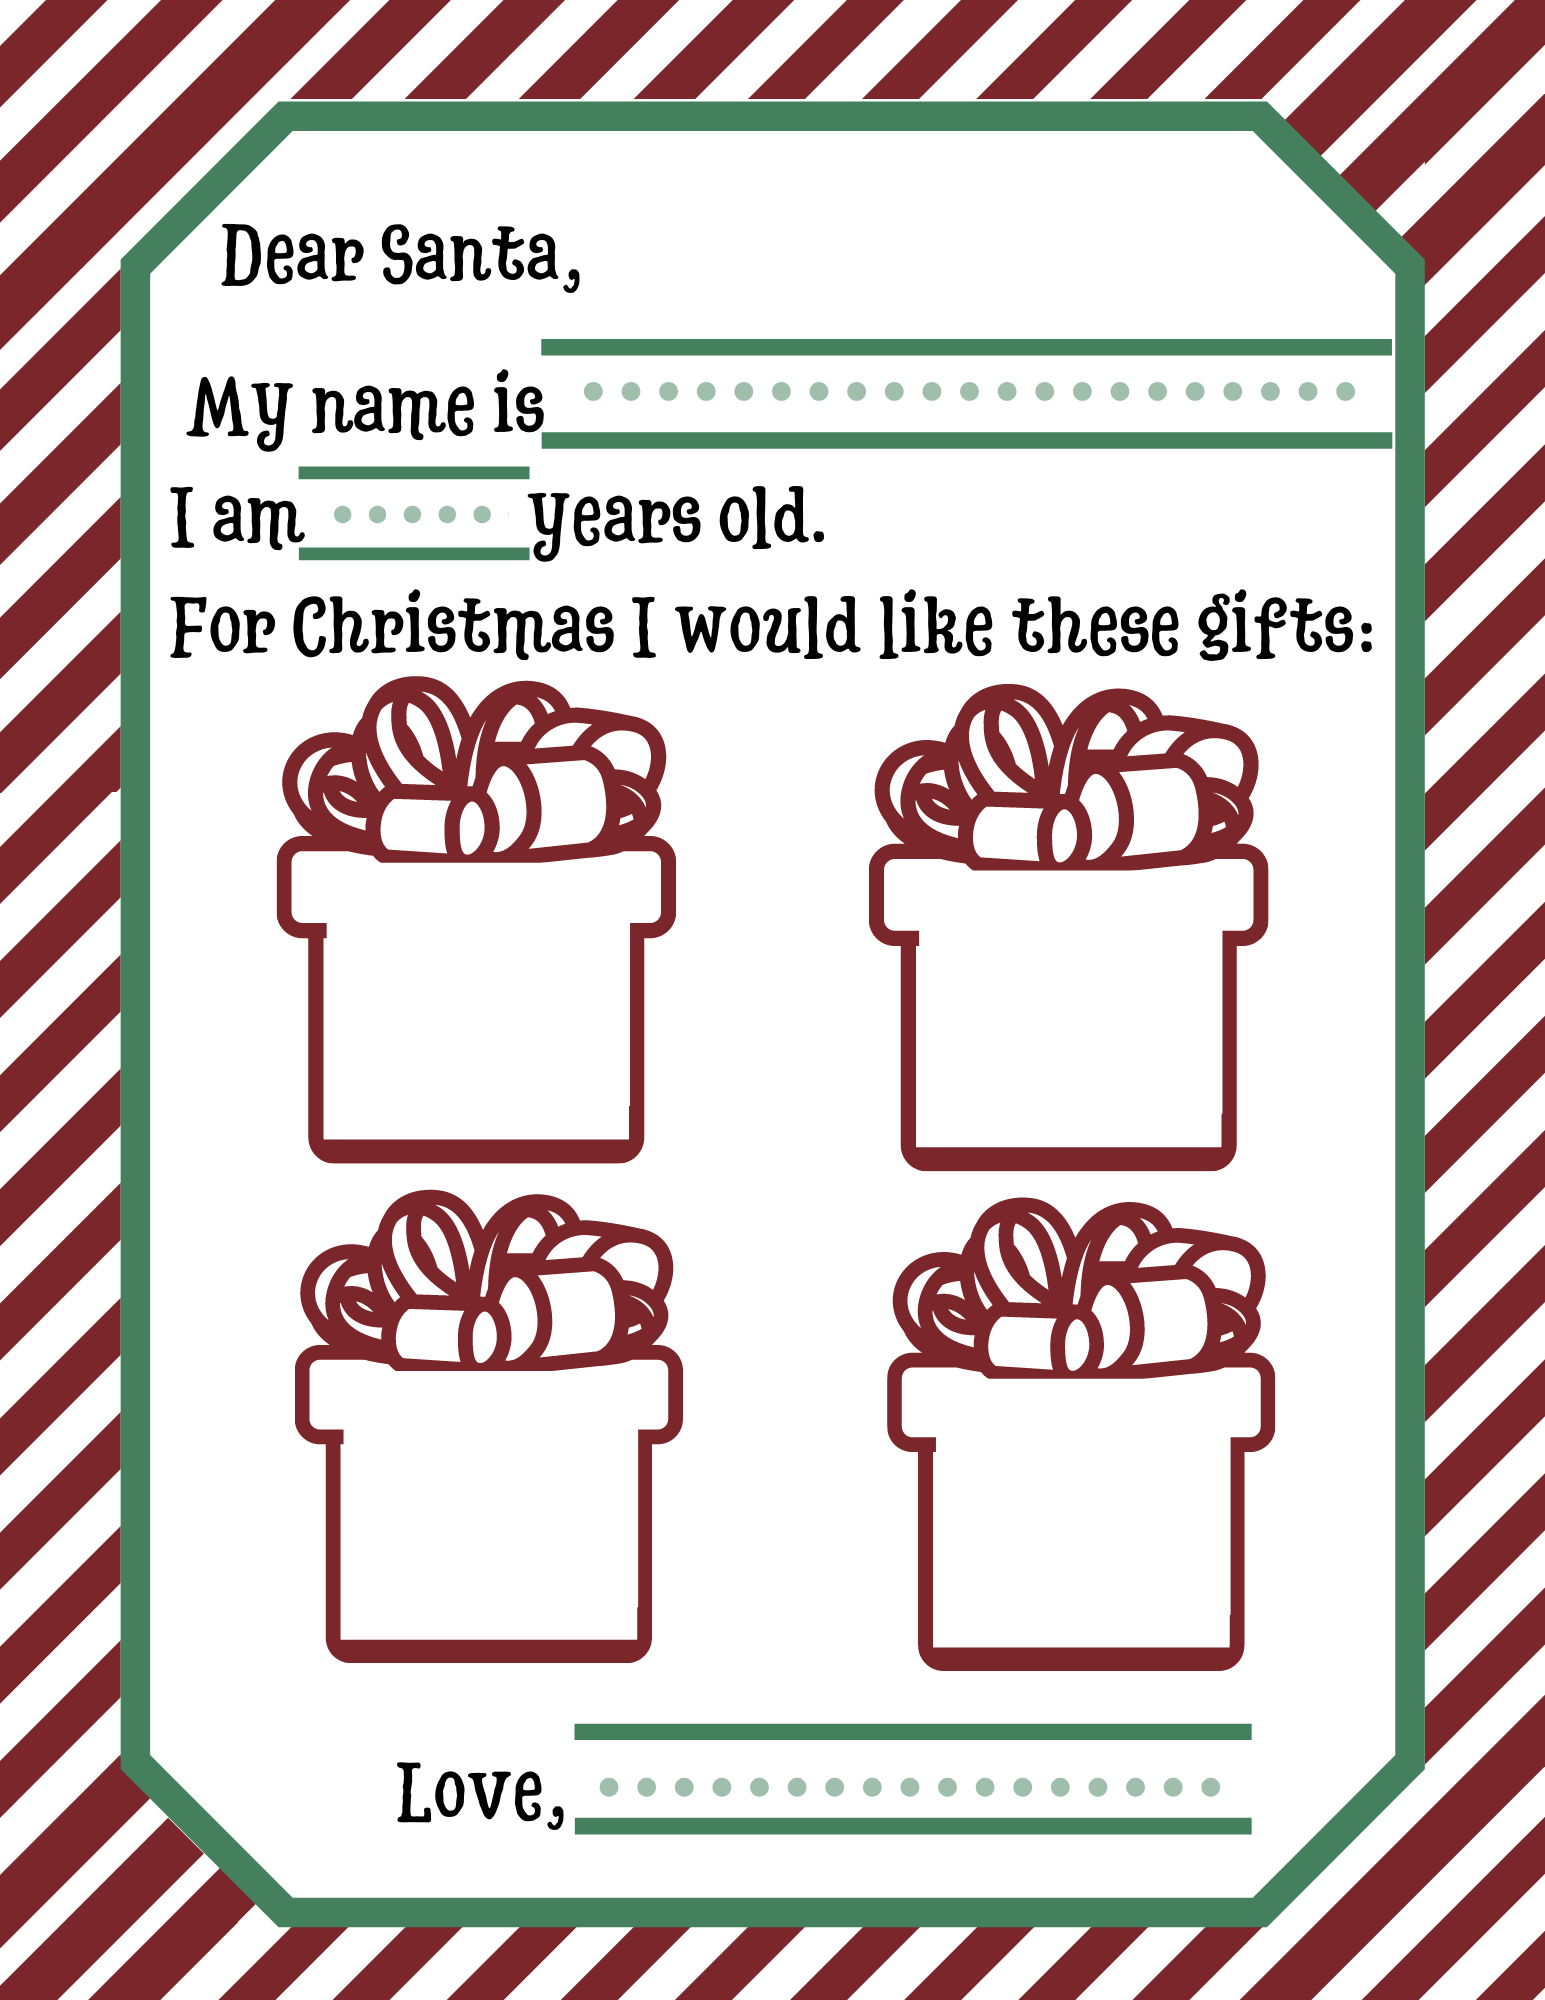 This printable letter to santa features space for your child to draw his request